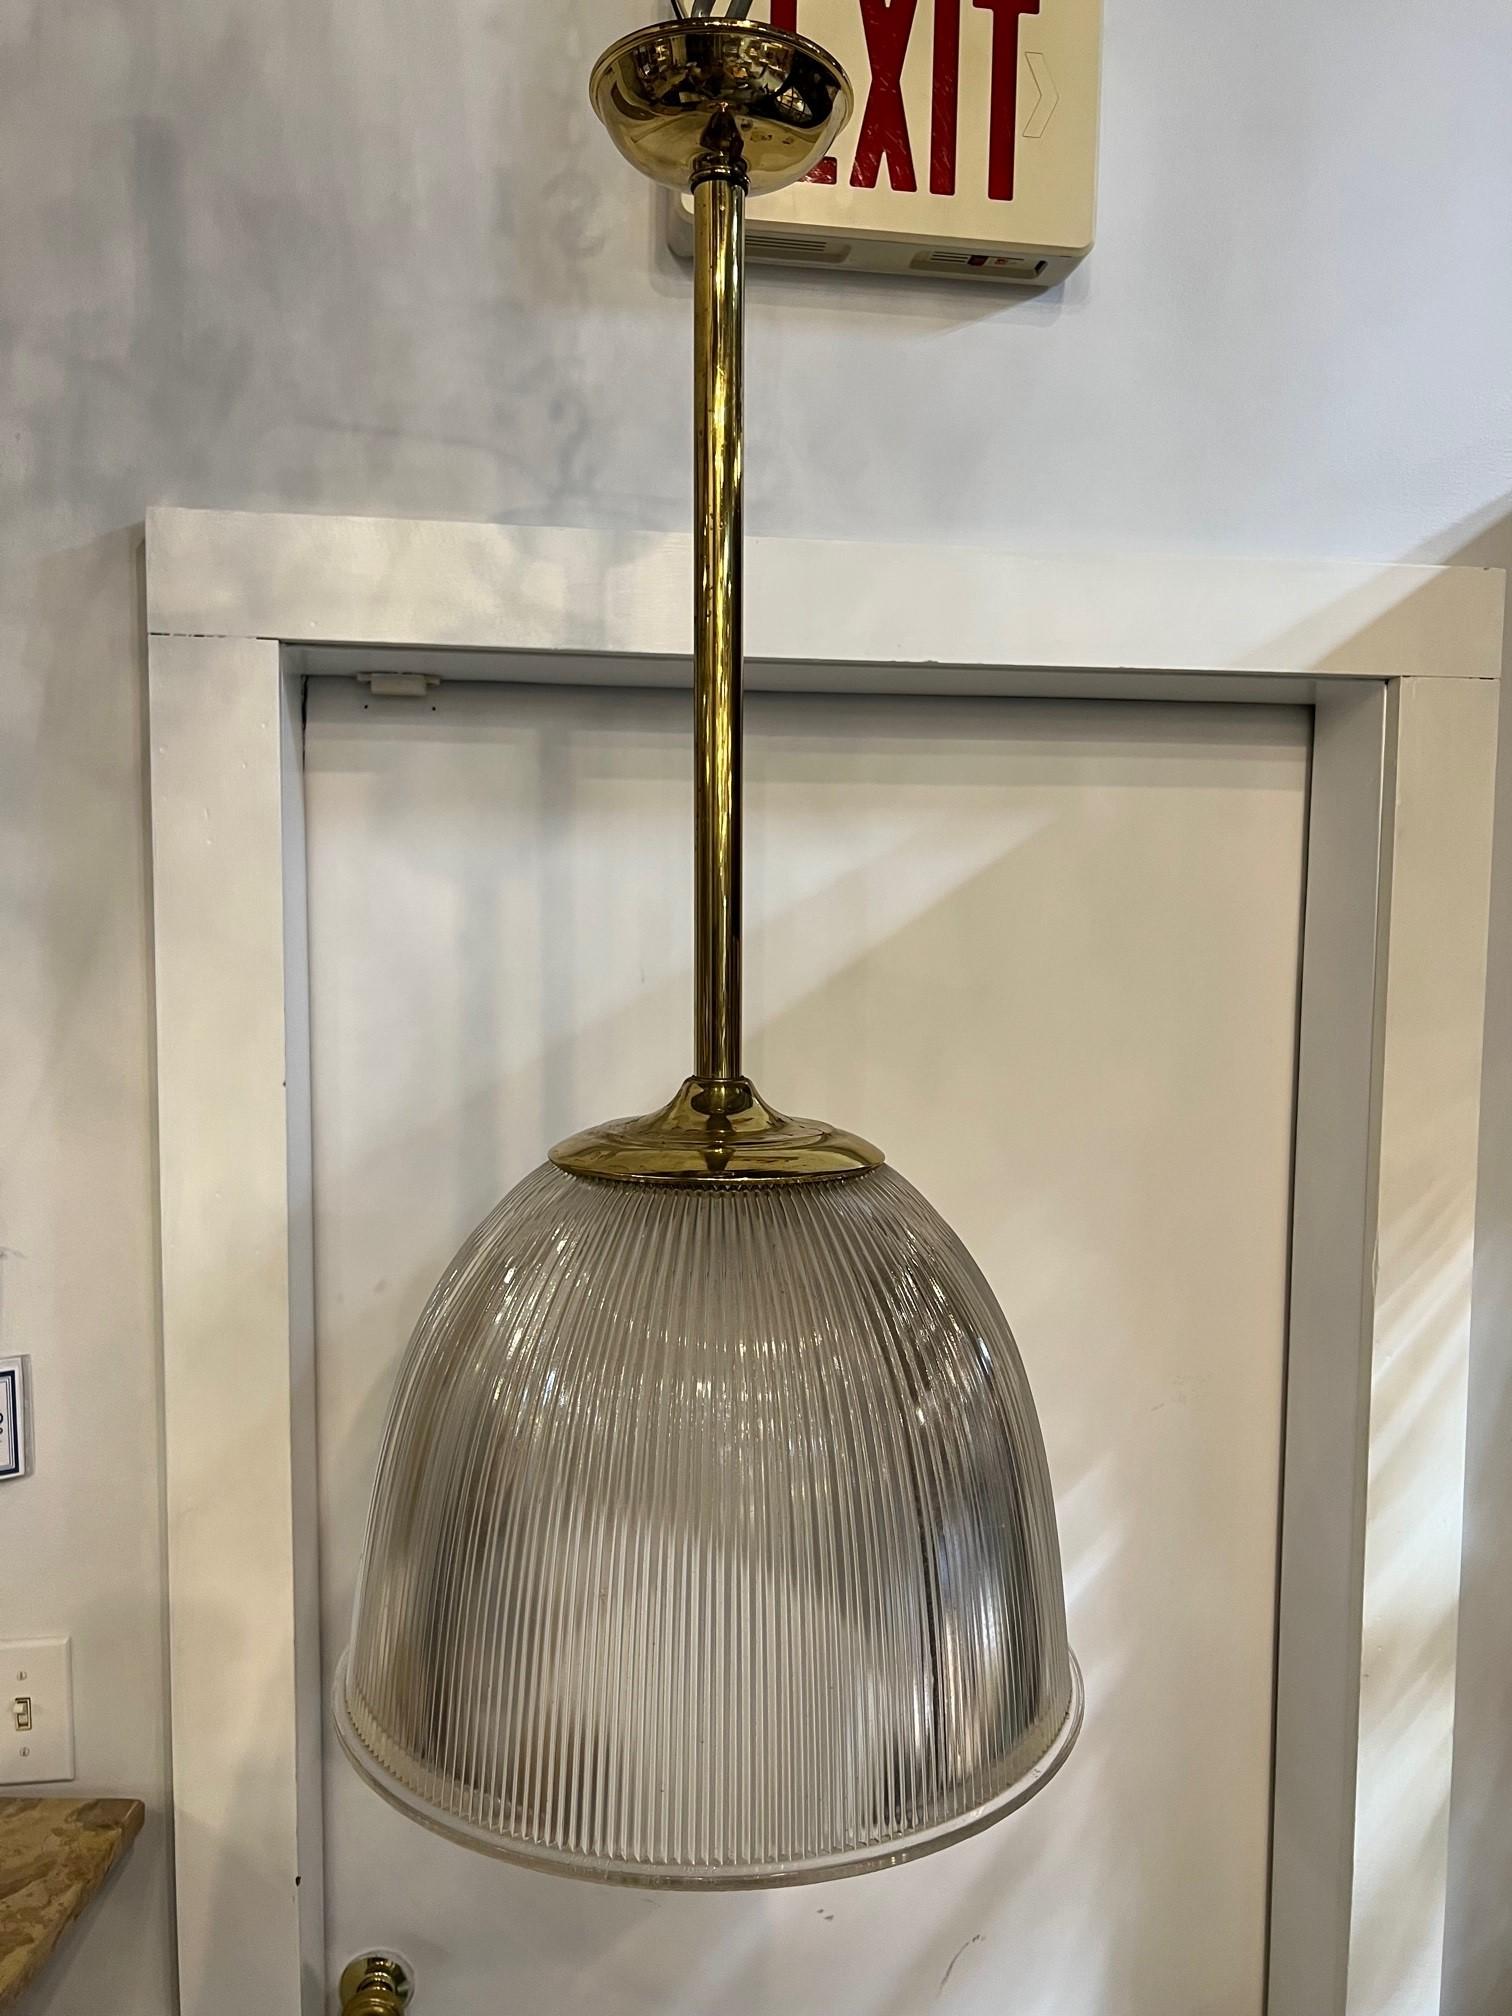 Seven Mid-20th Century Holophane Pyrex Glass Globe Pendant Light with Brass Pole For Sale 6